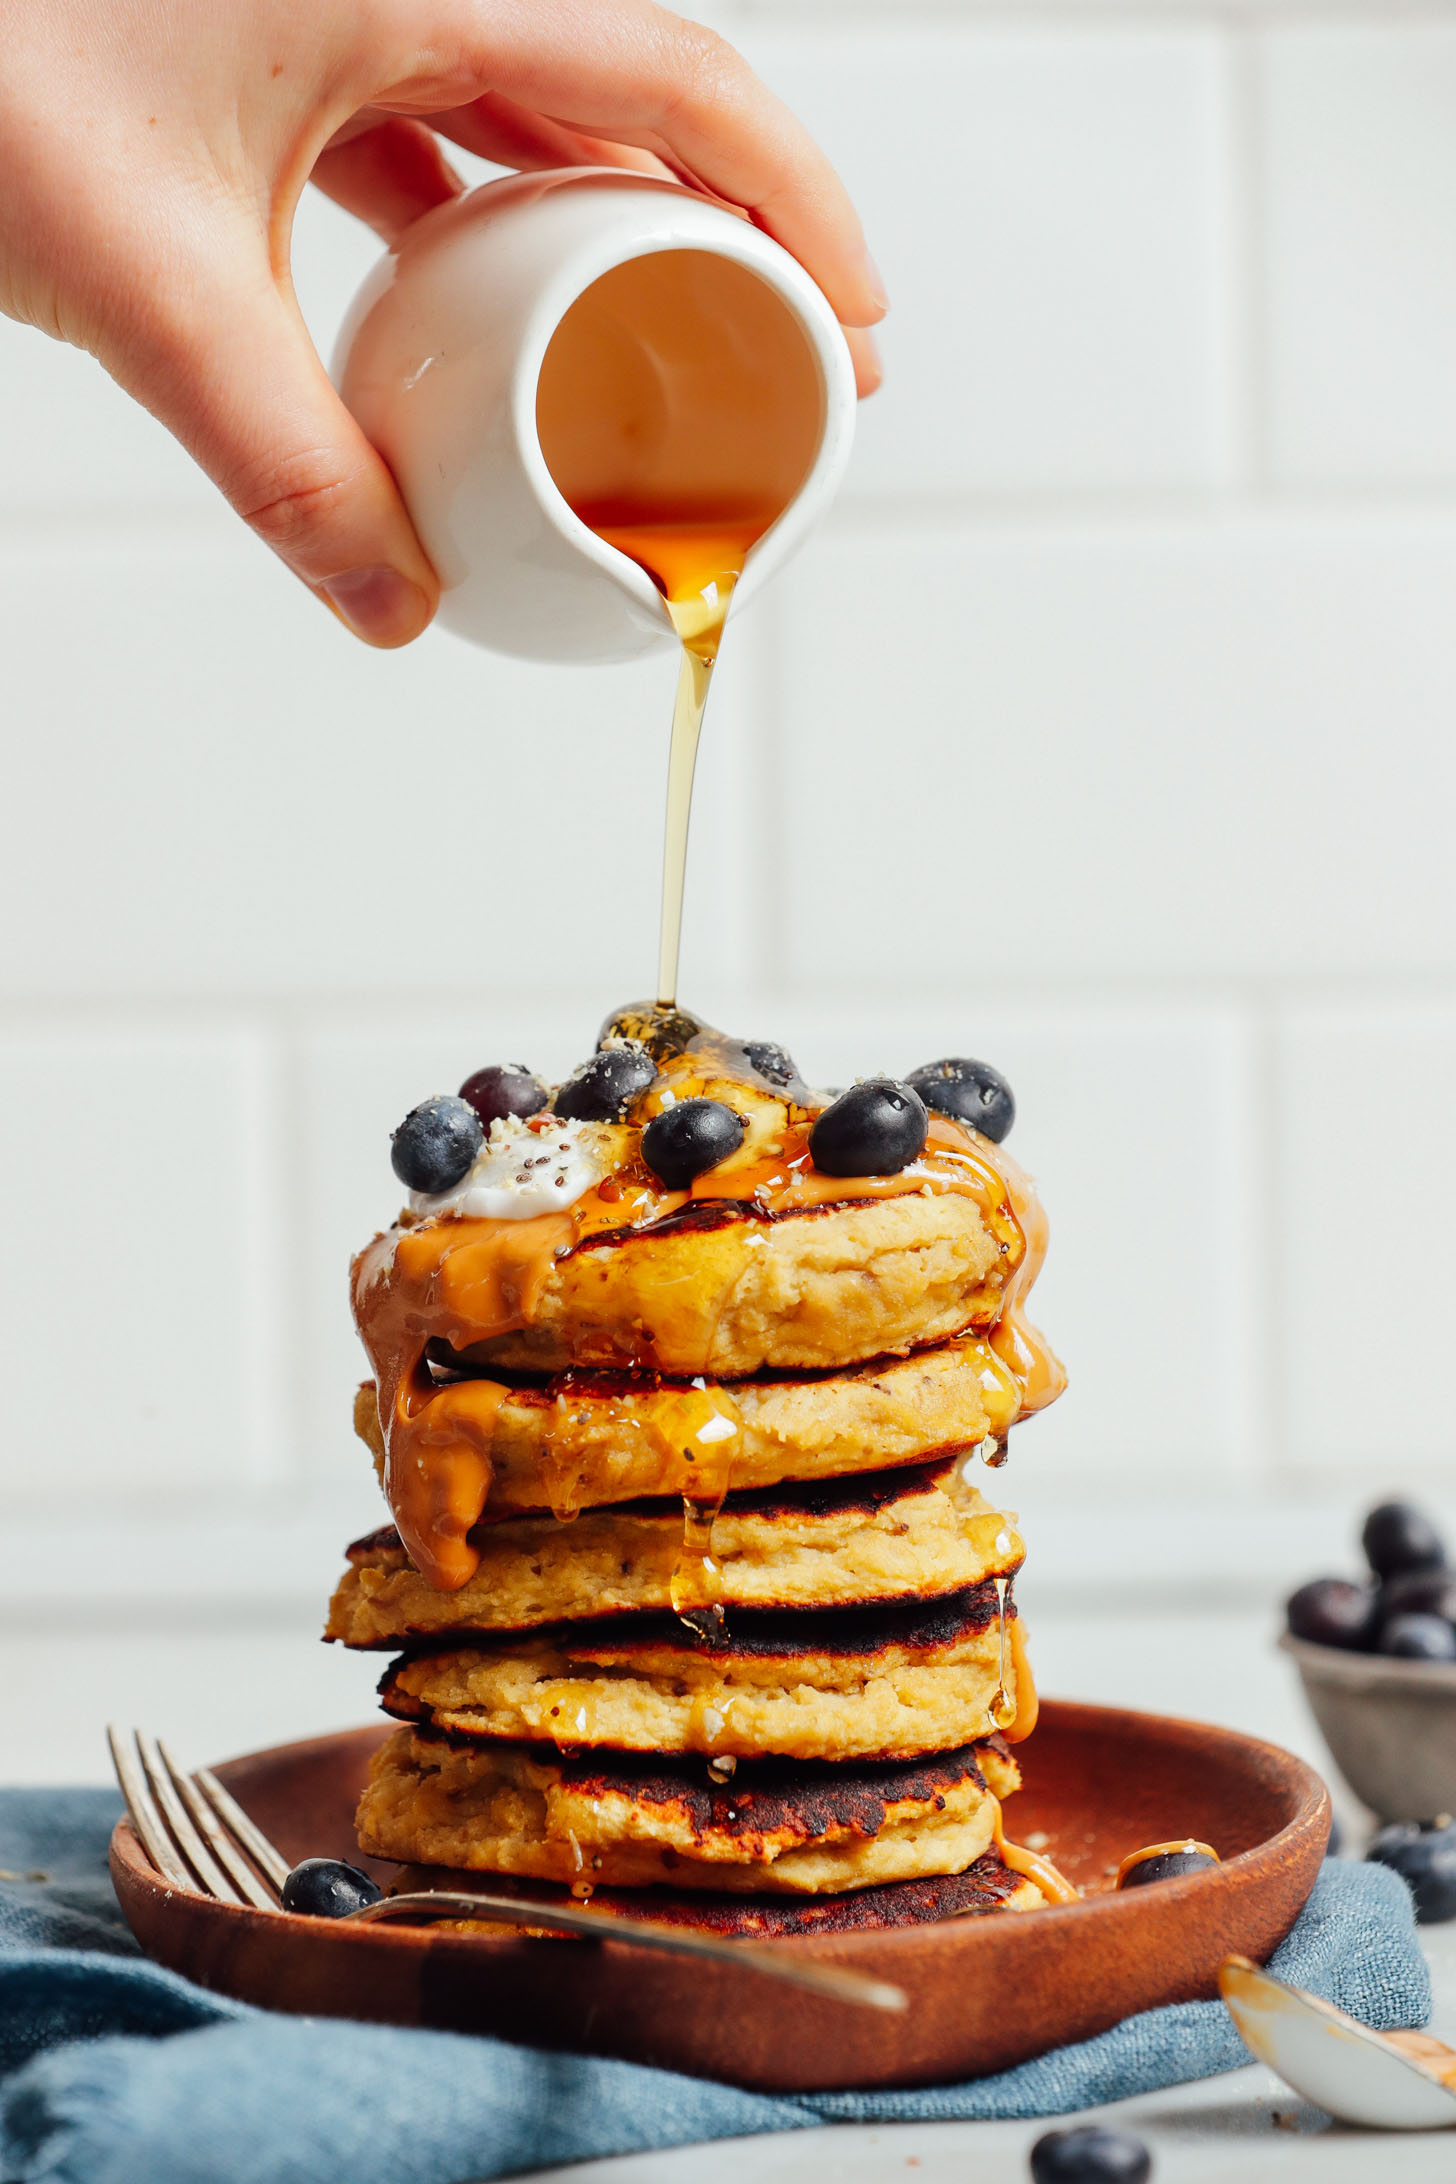 Pouring syrup onto a stack of grain-free dairy-free Banana Pancakes topped with fresh blueberries